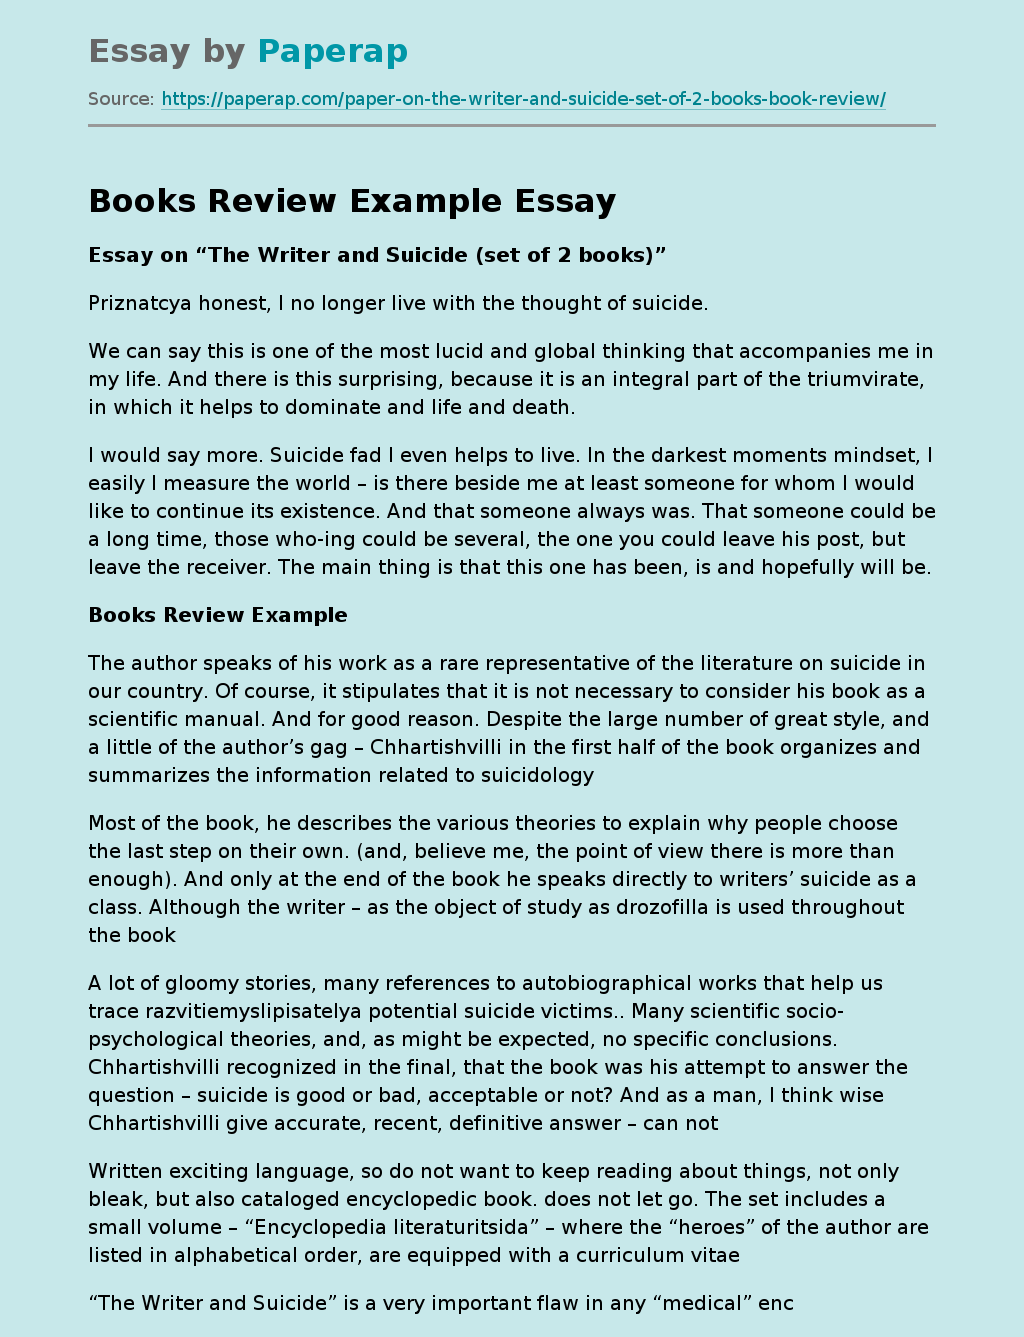 Books Review Example